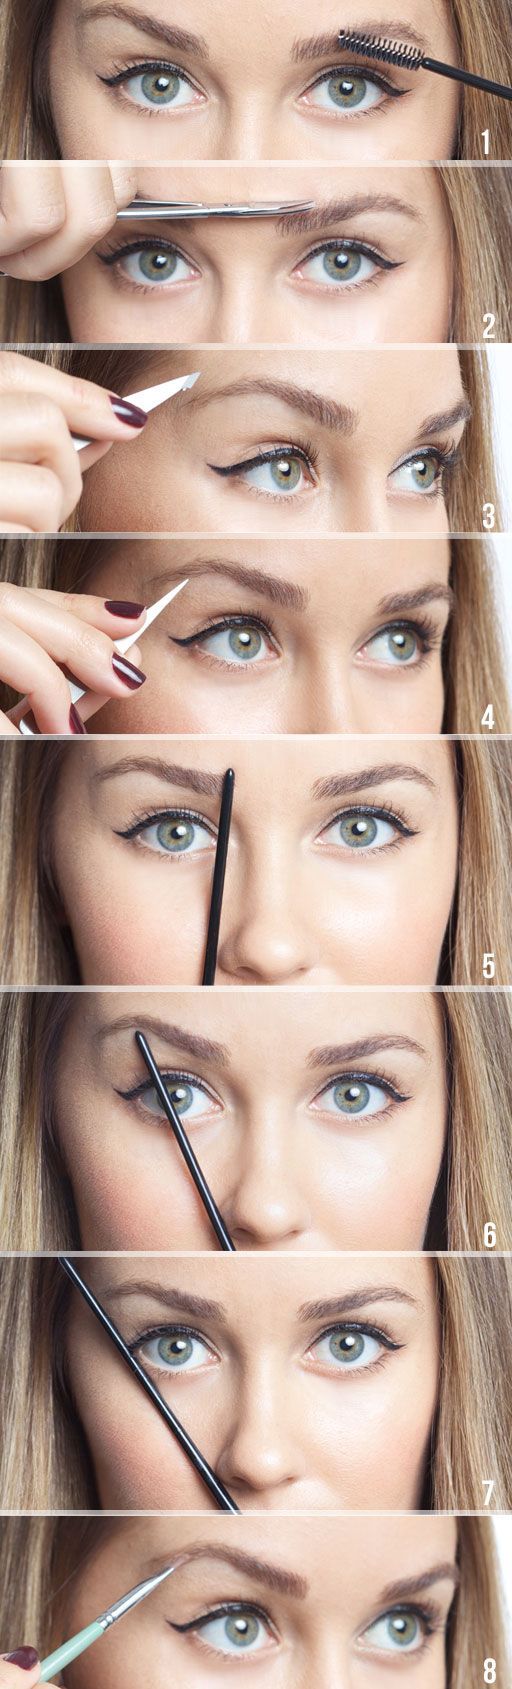 How to perfectly shape your brows! So handy